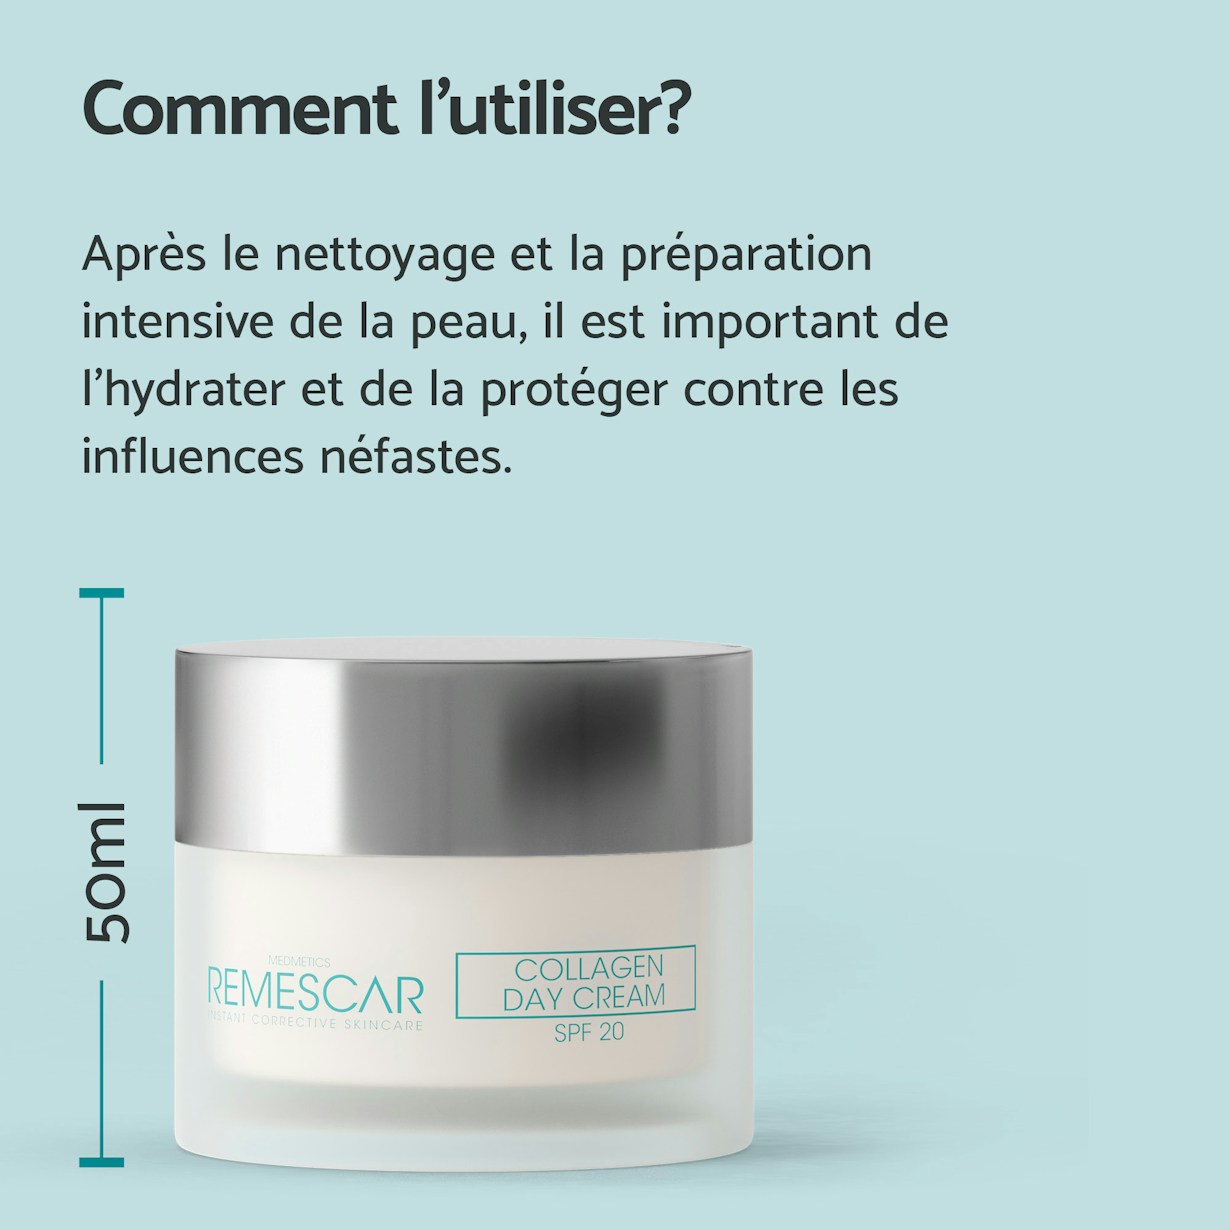 Remescar pdp pictures website and amazon 2000x2000px collagen day cream FR4